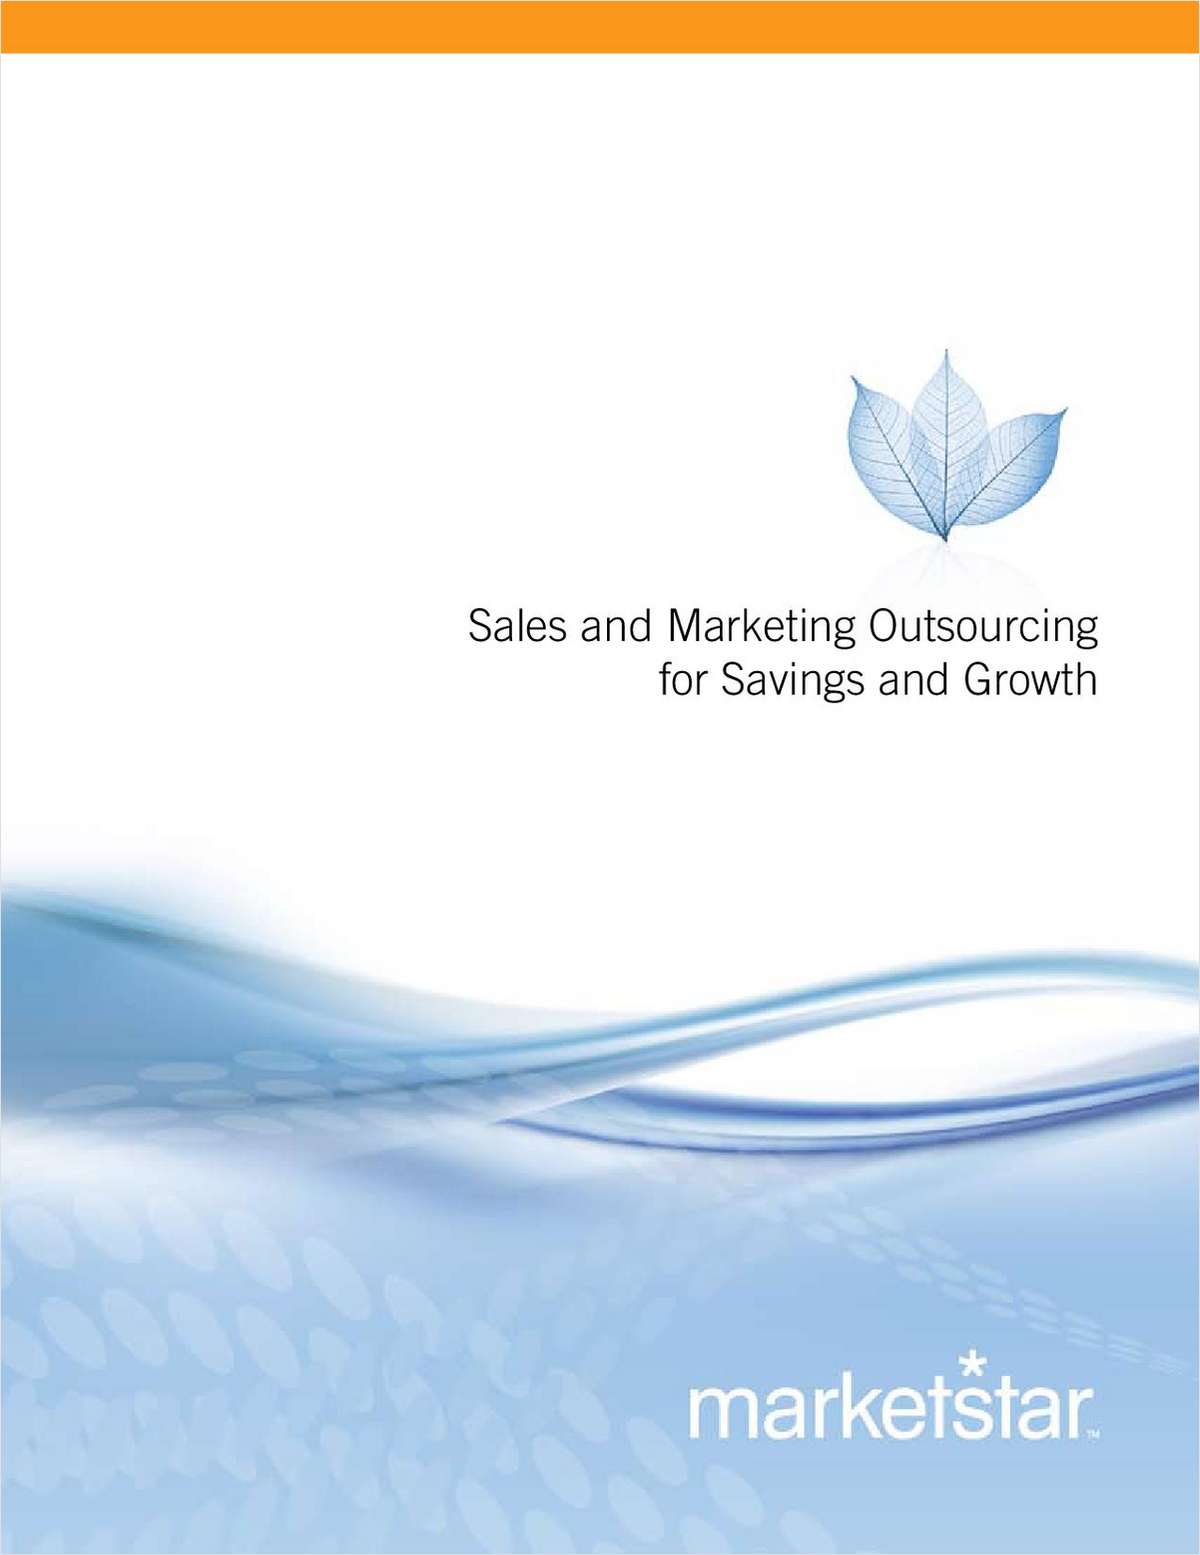 Sales and Marketing Outsourcing for Savings and Growth